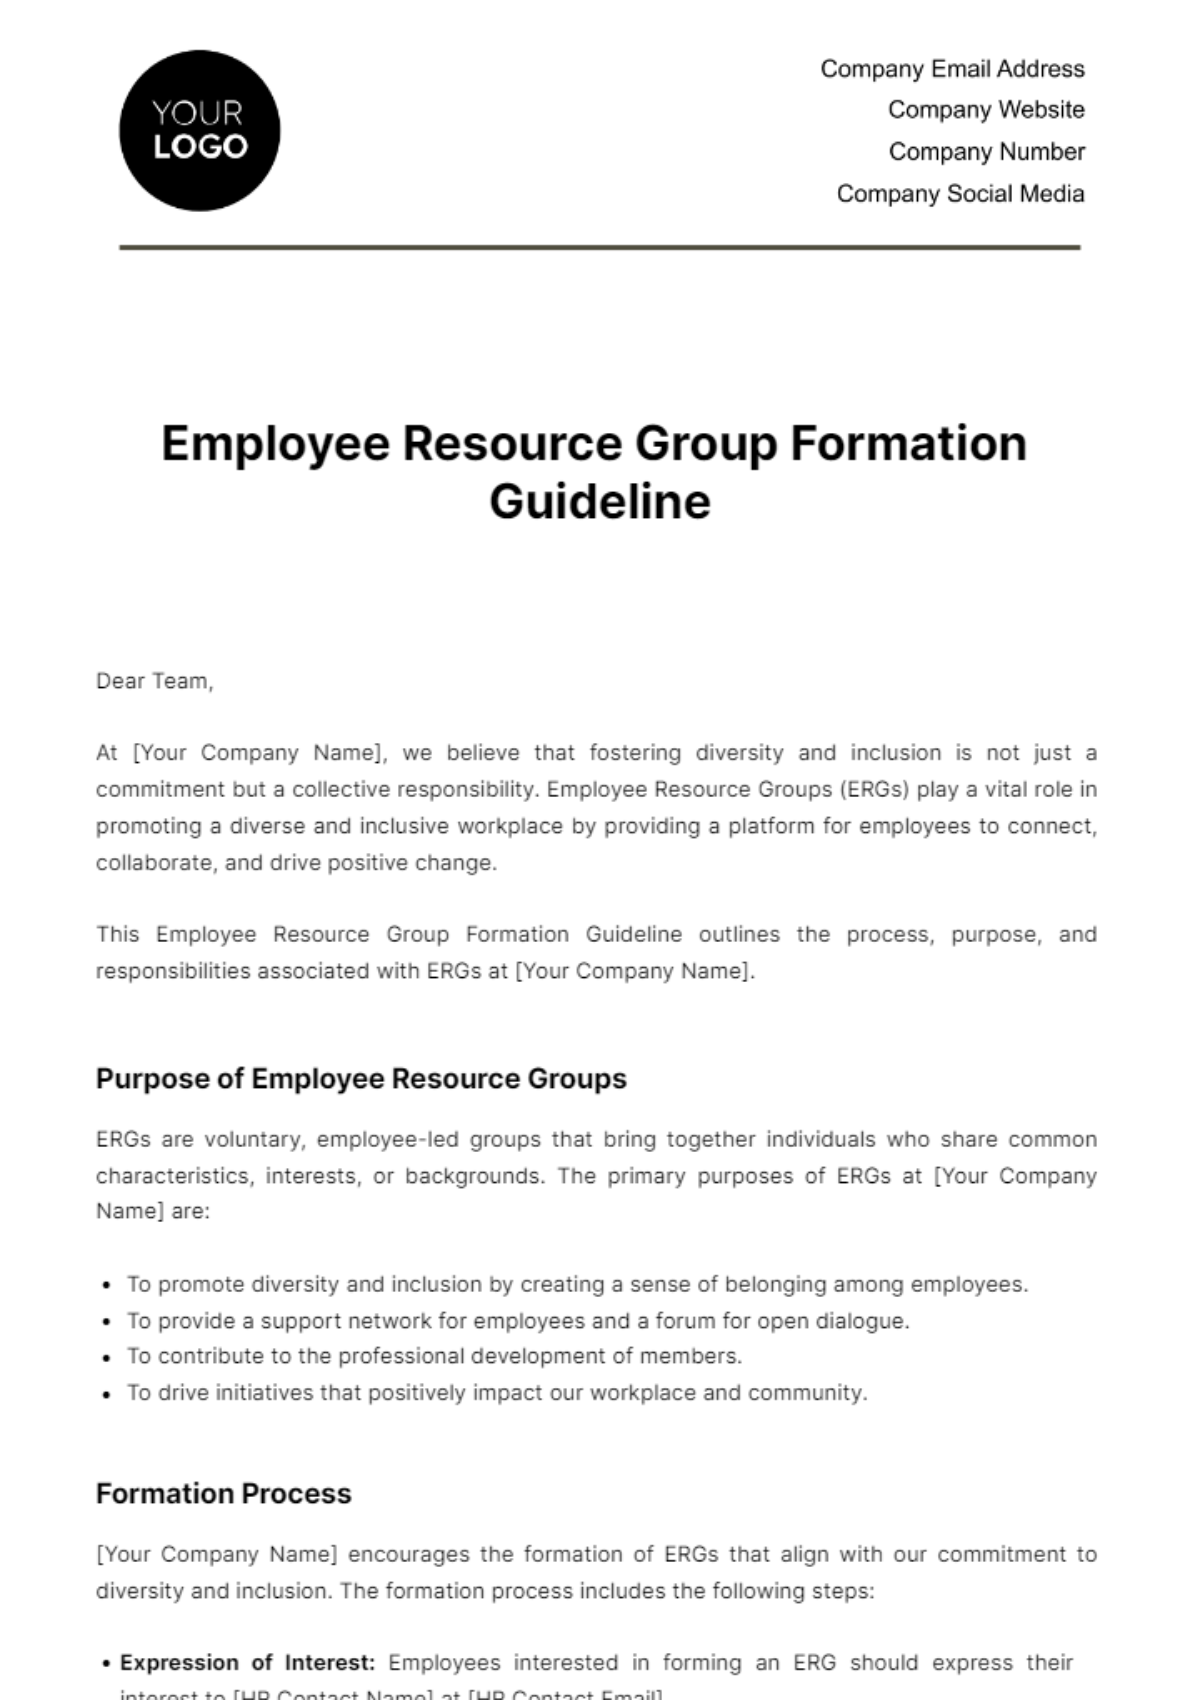 Free Employee Resource Group Formation Guideline HR Template